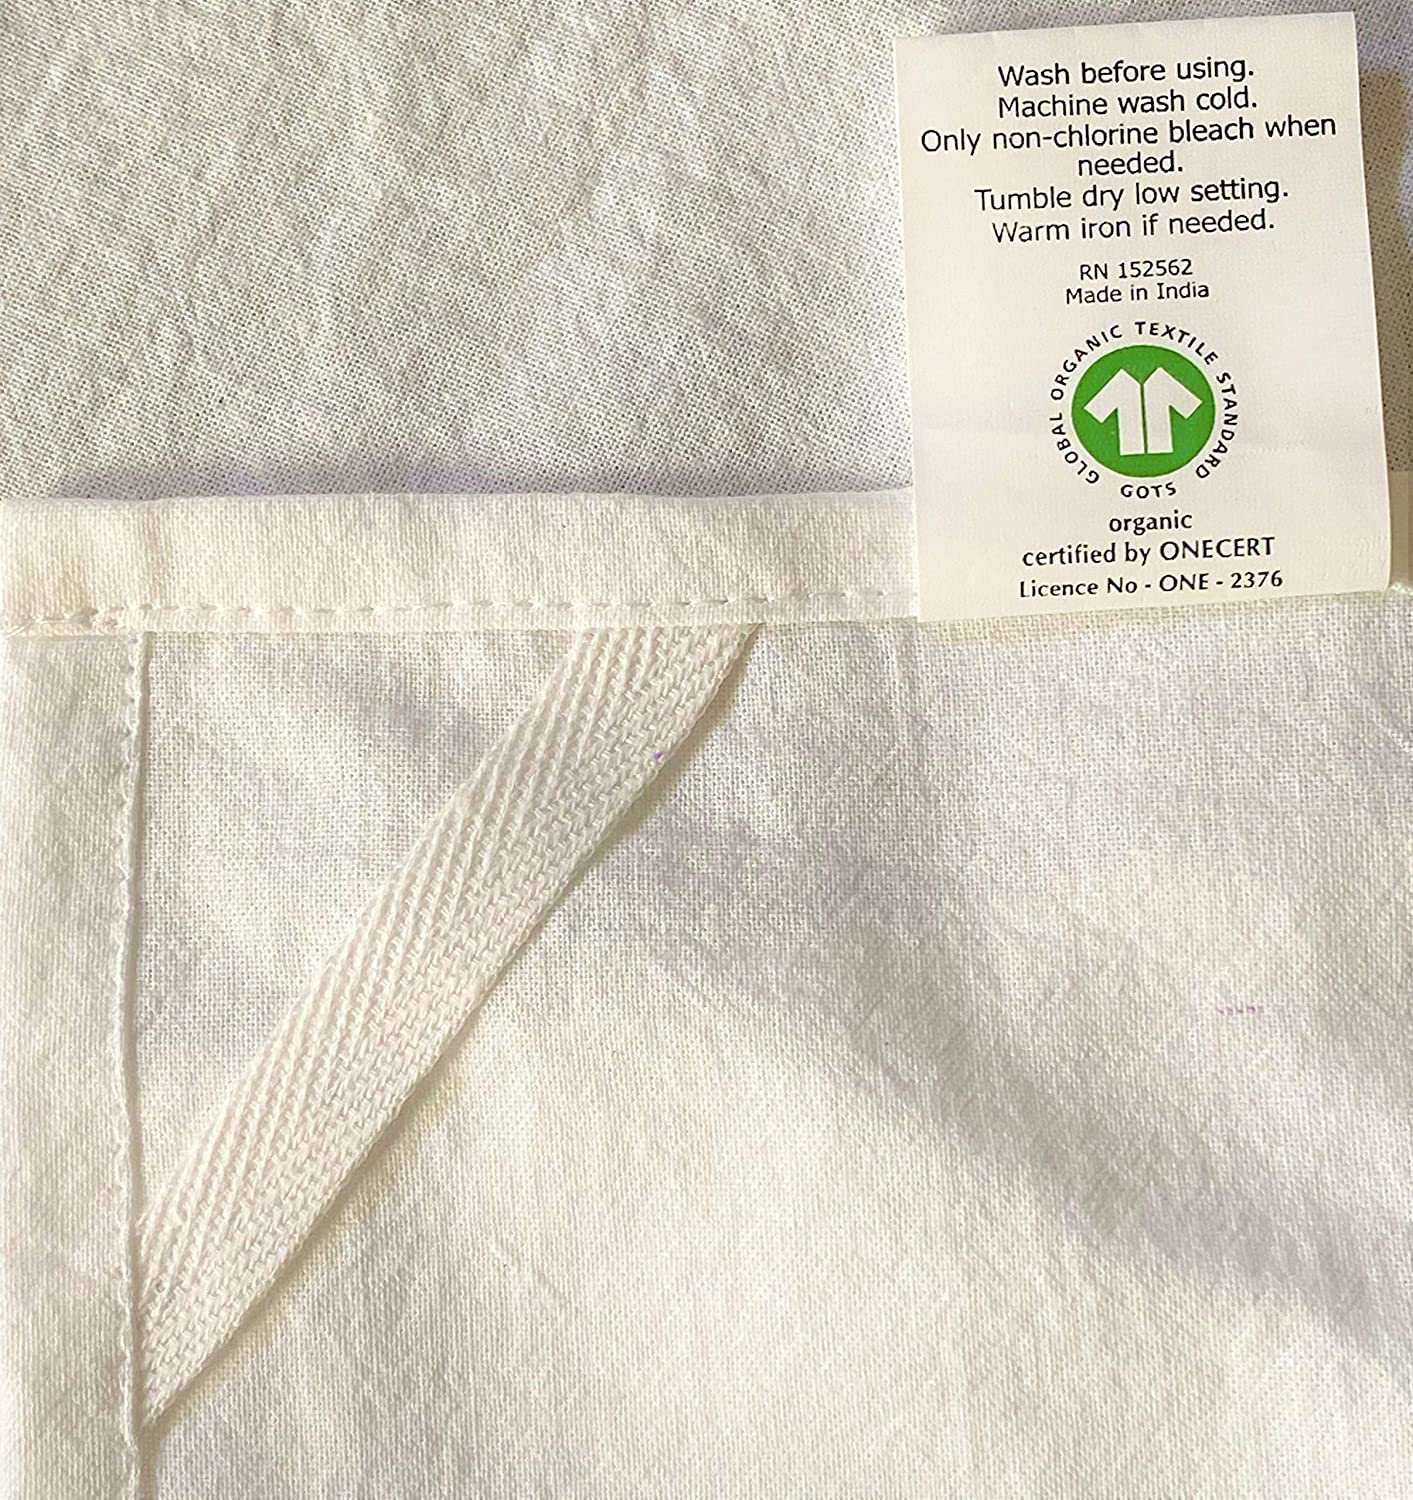 Certified Organic Flour Sack Towels-Wholesale-160 pieces-13x13 Inches White